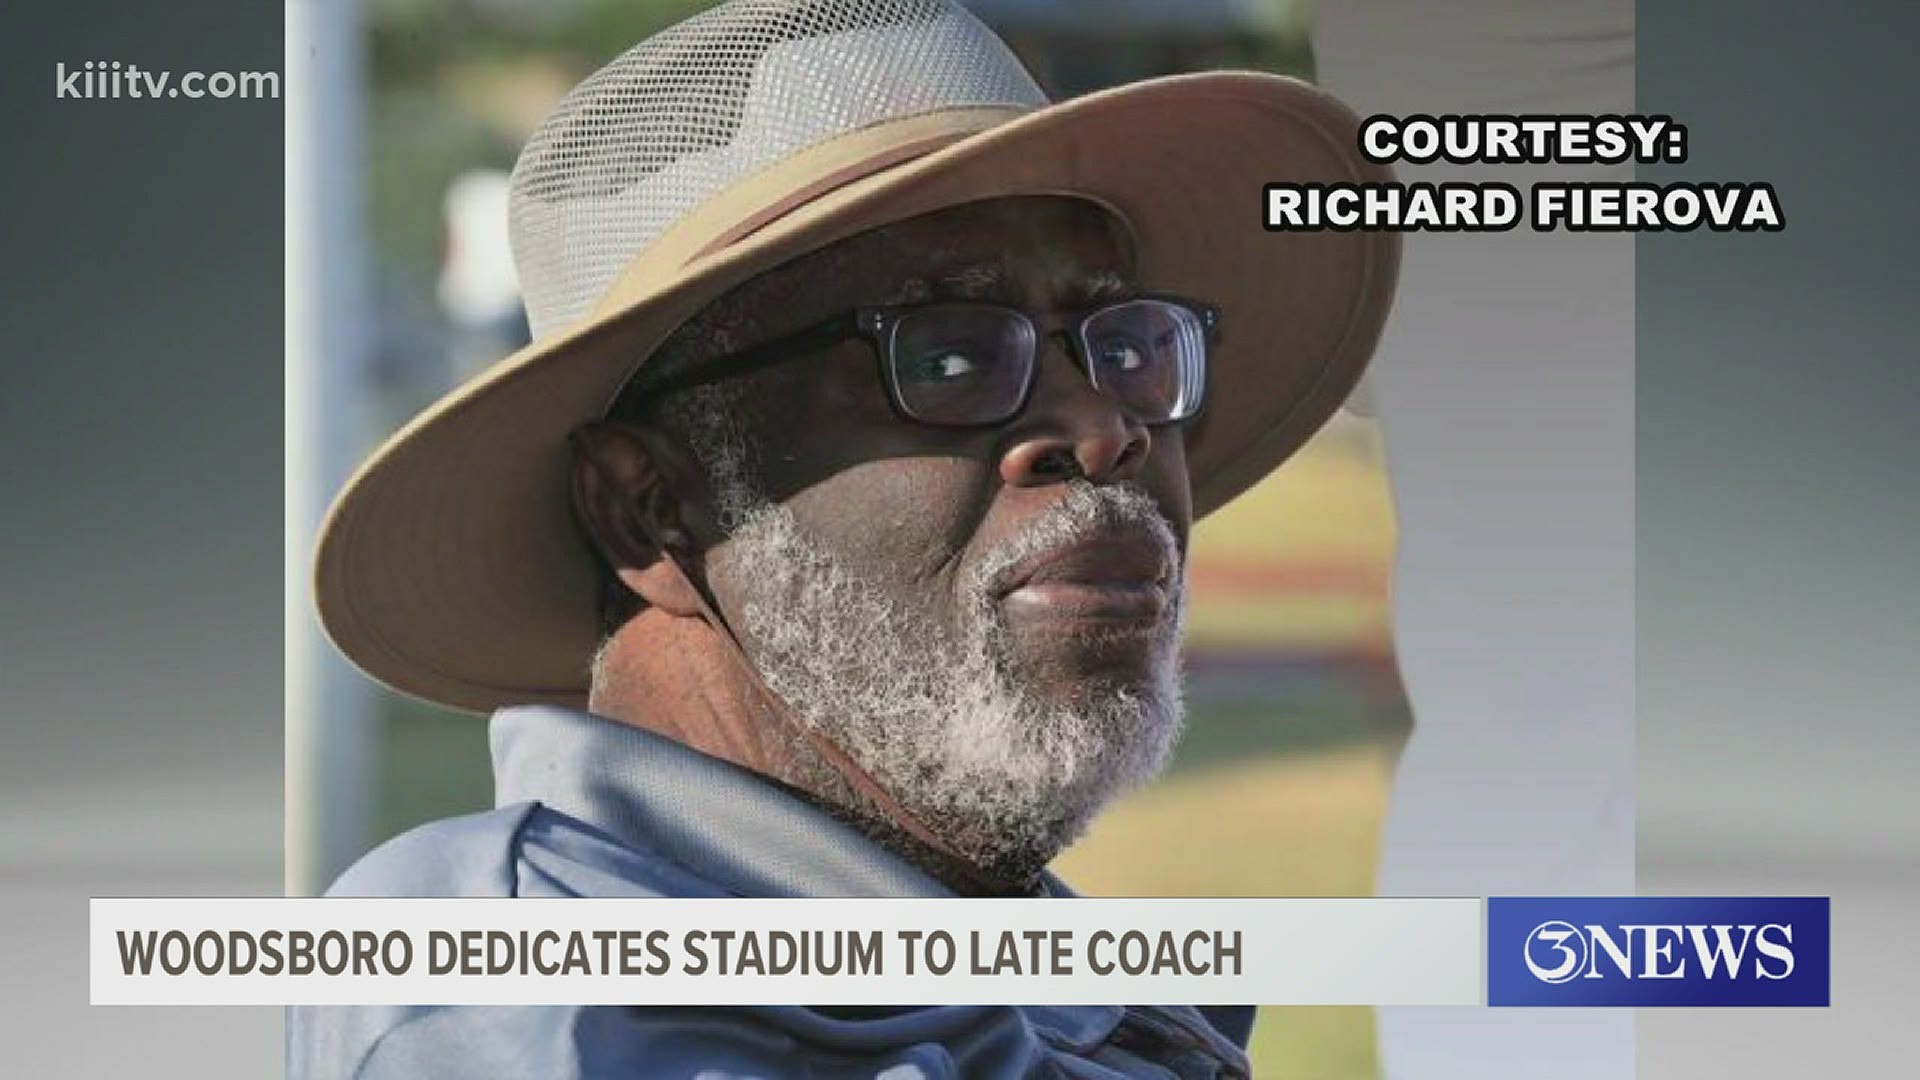 Houston coached in the district for 32 years before passing away from health complications in May 2020.